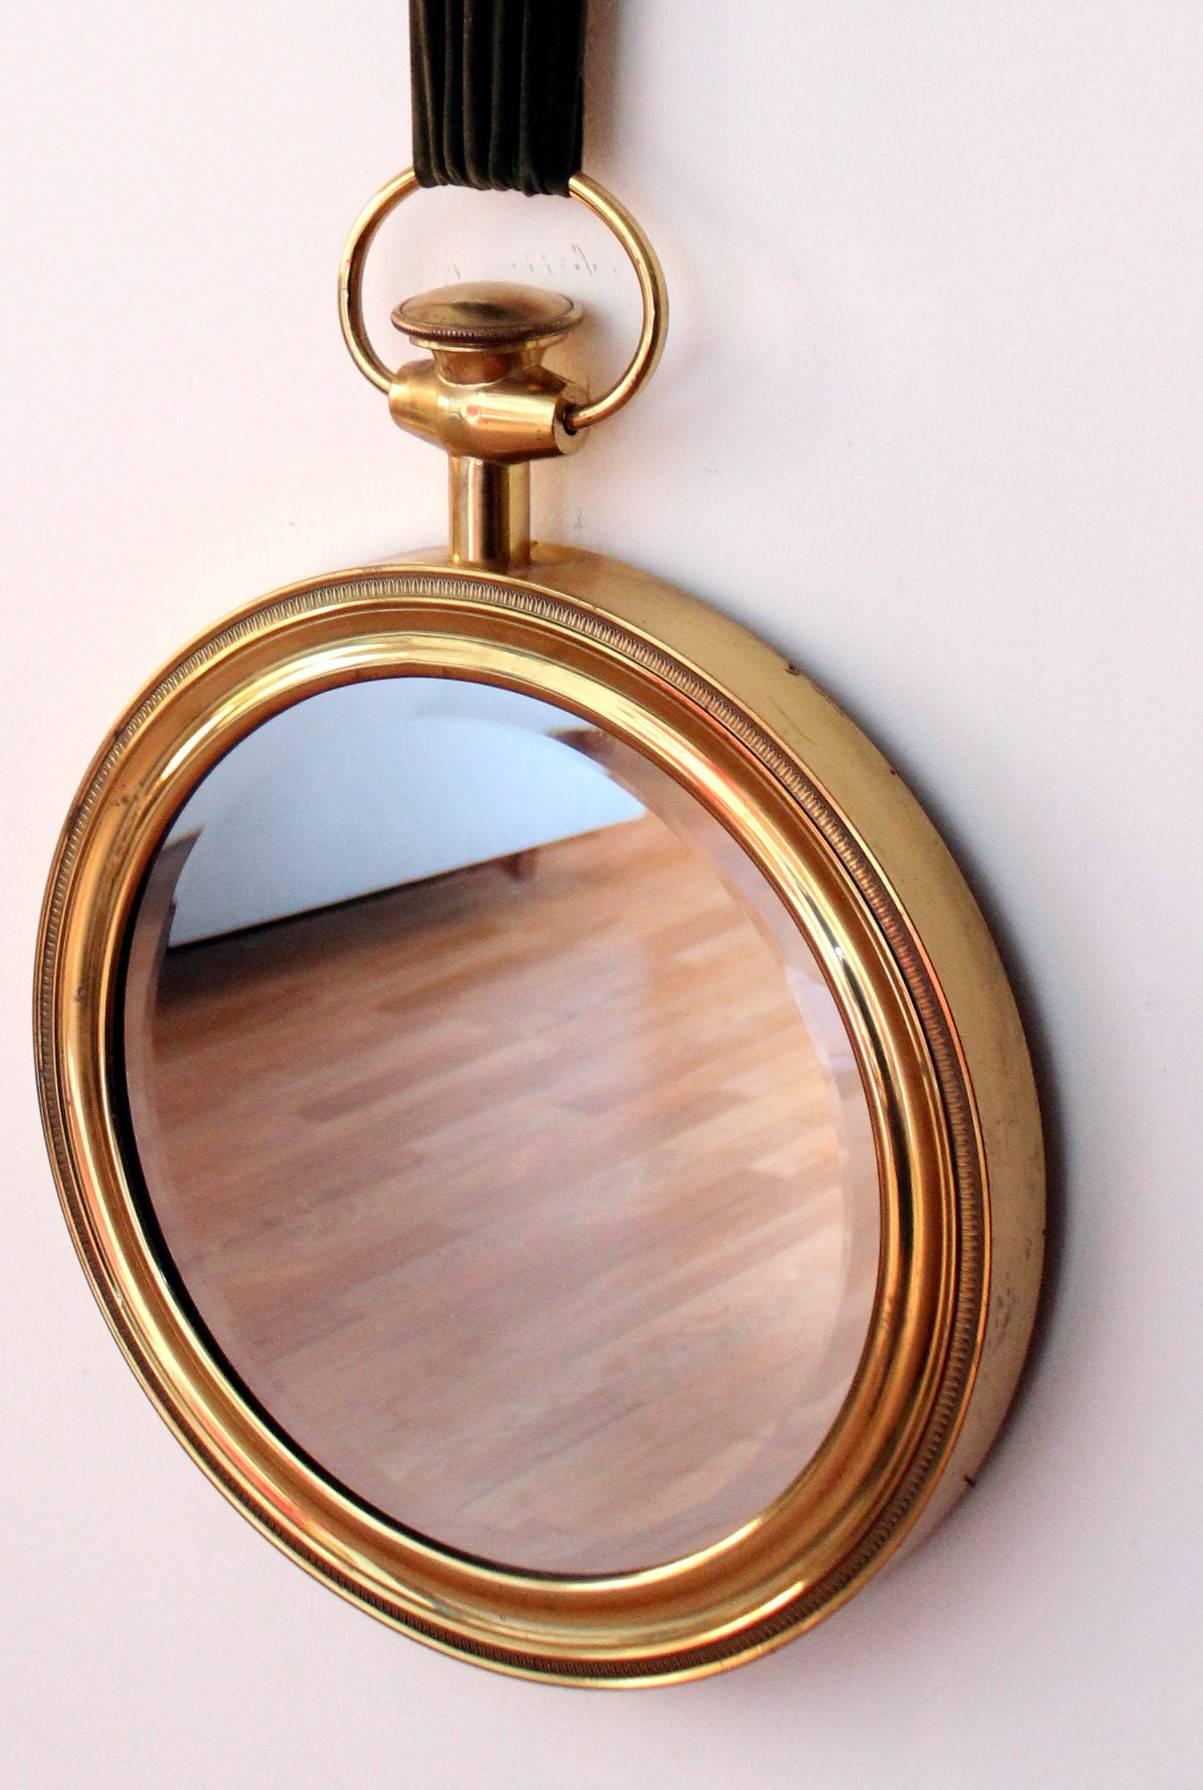 Classic round brass framed mirror, with a 1